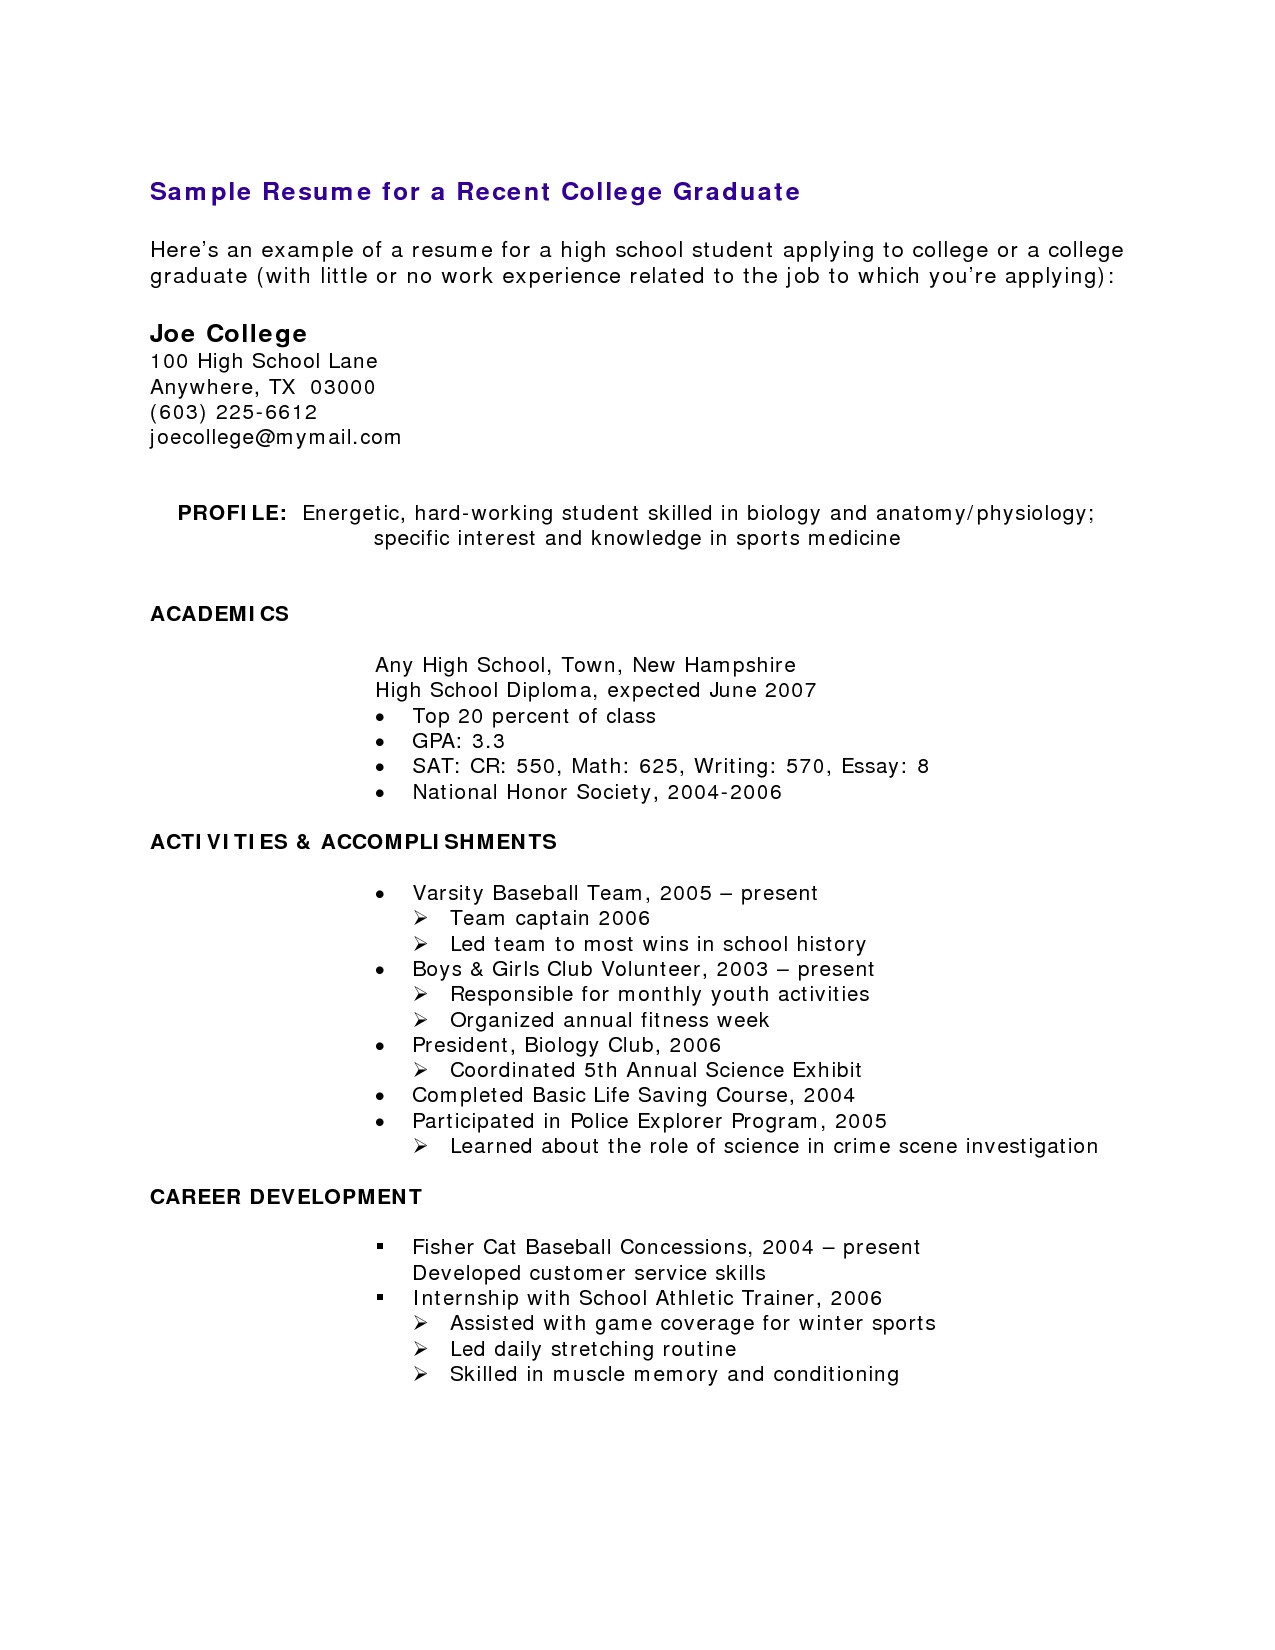 Resume Template for High School Student No Work Experience How to Make A Resume for Job with No Experience – Easy Resume Sample